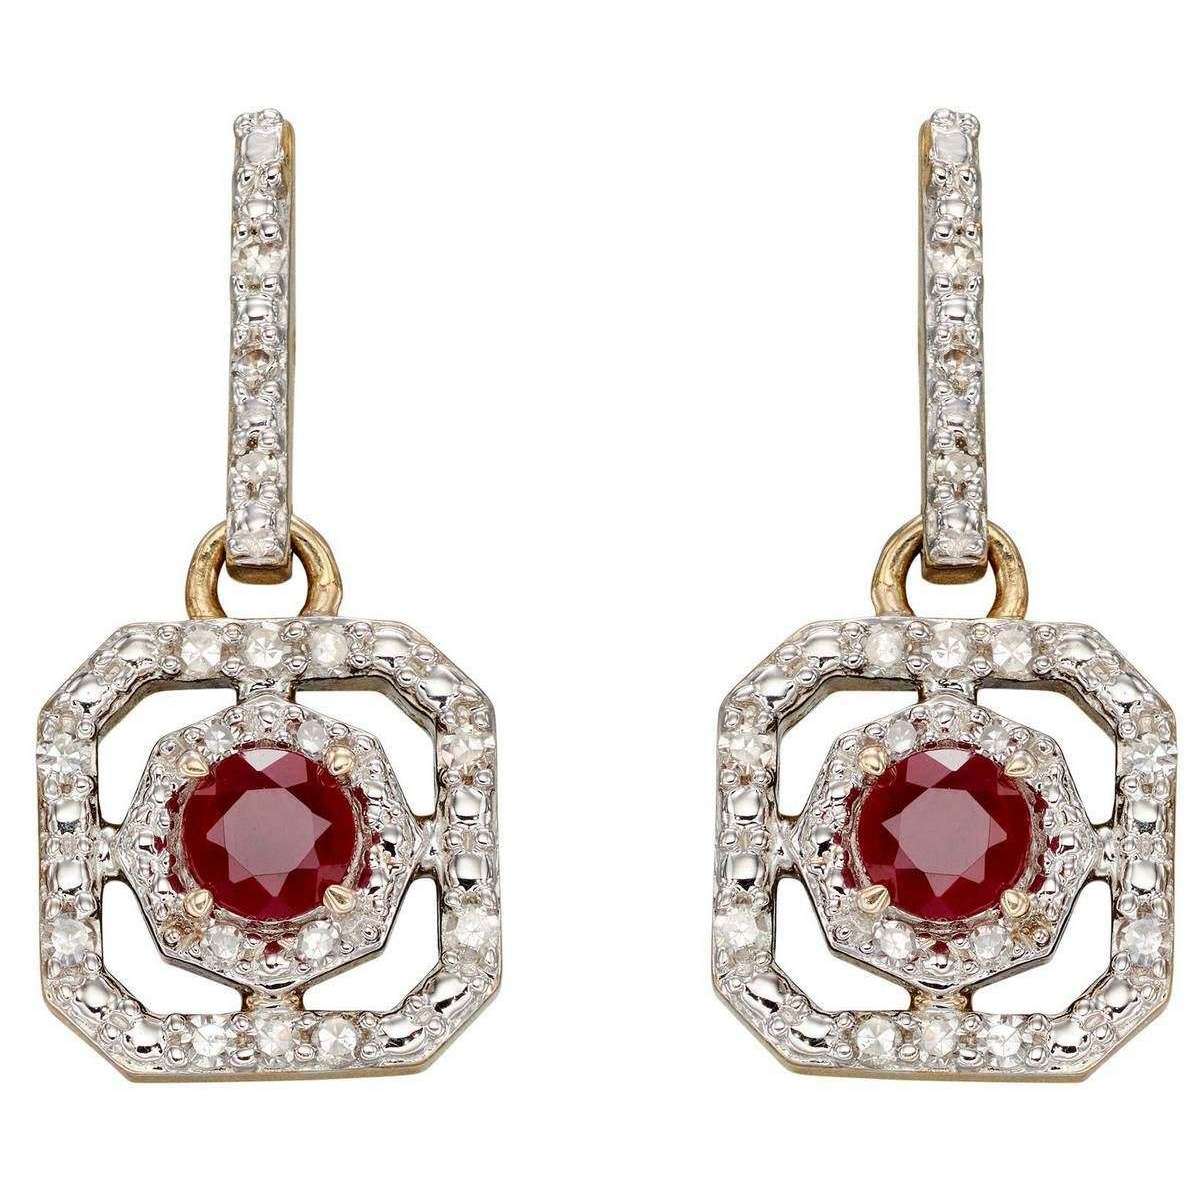 Elements Gold Ruby and Dimond Art Deco Earrings - Gold/Clear/Red